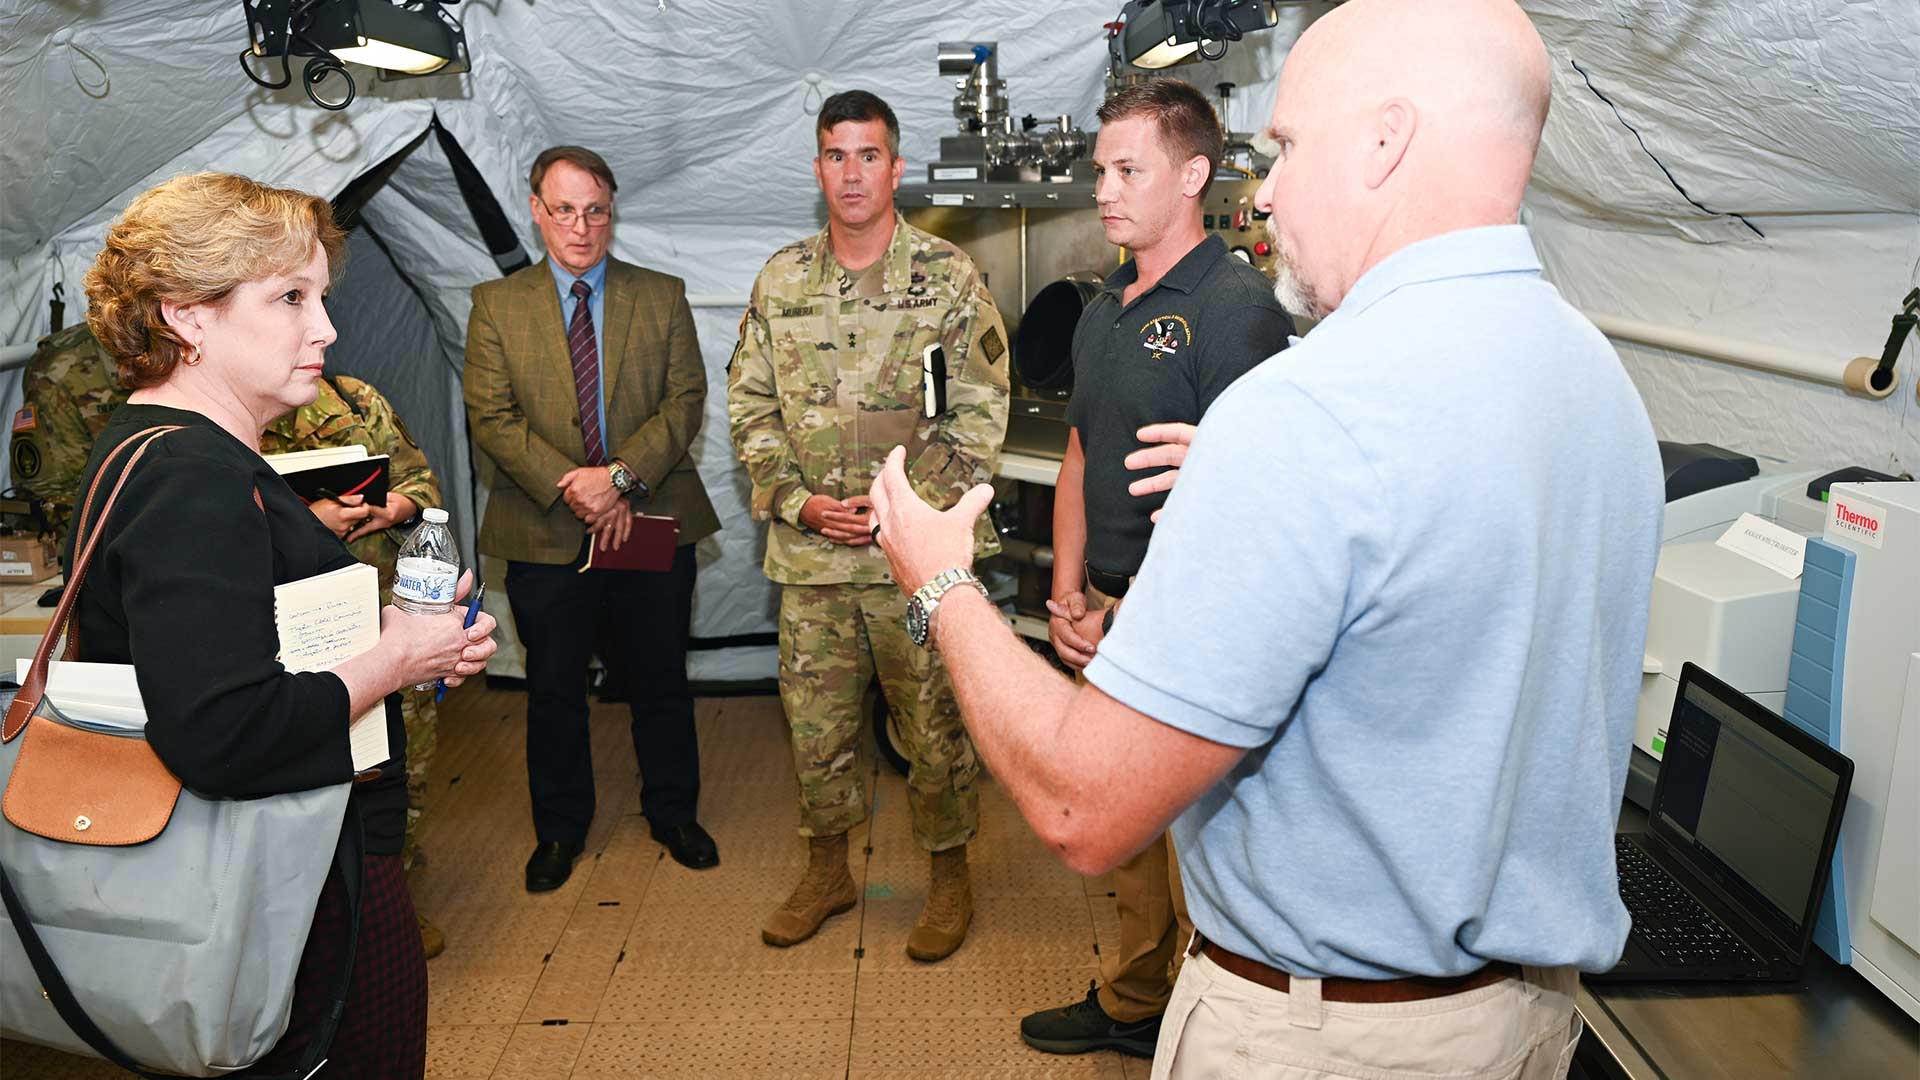 Strengthening Partnerships in Nuclear Deterrence: the 20th CBRNE Commanding General and Nuclear Disablement Team hosts DTRA Director.